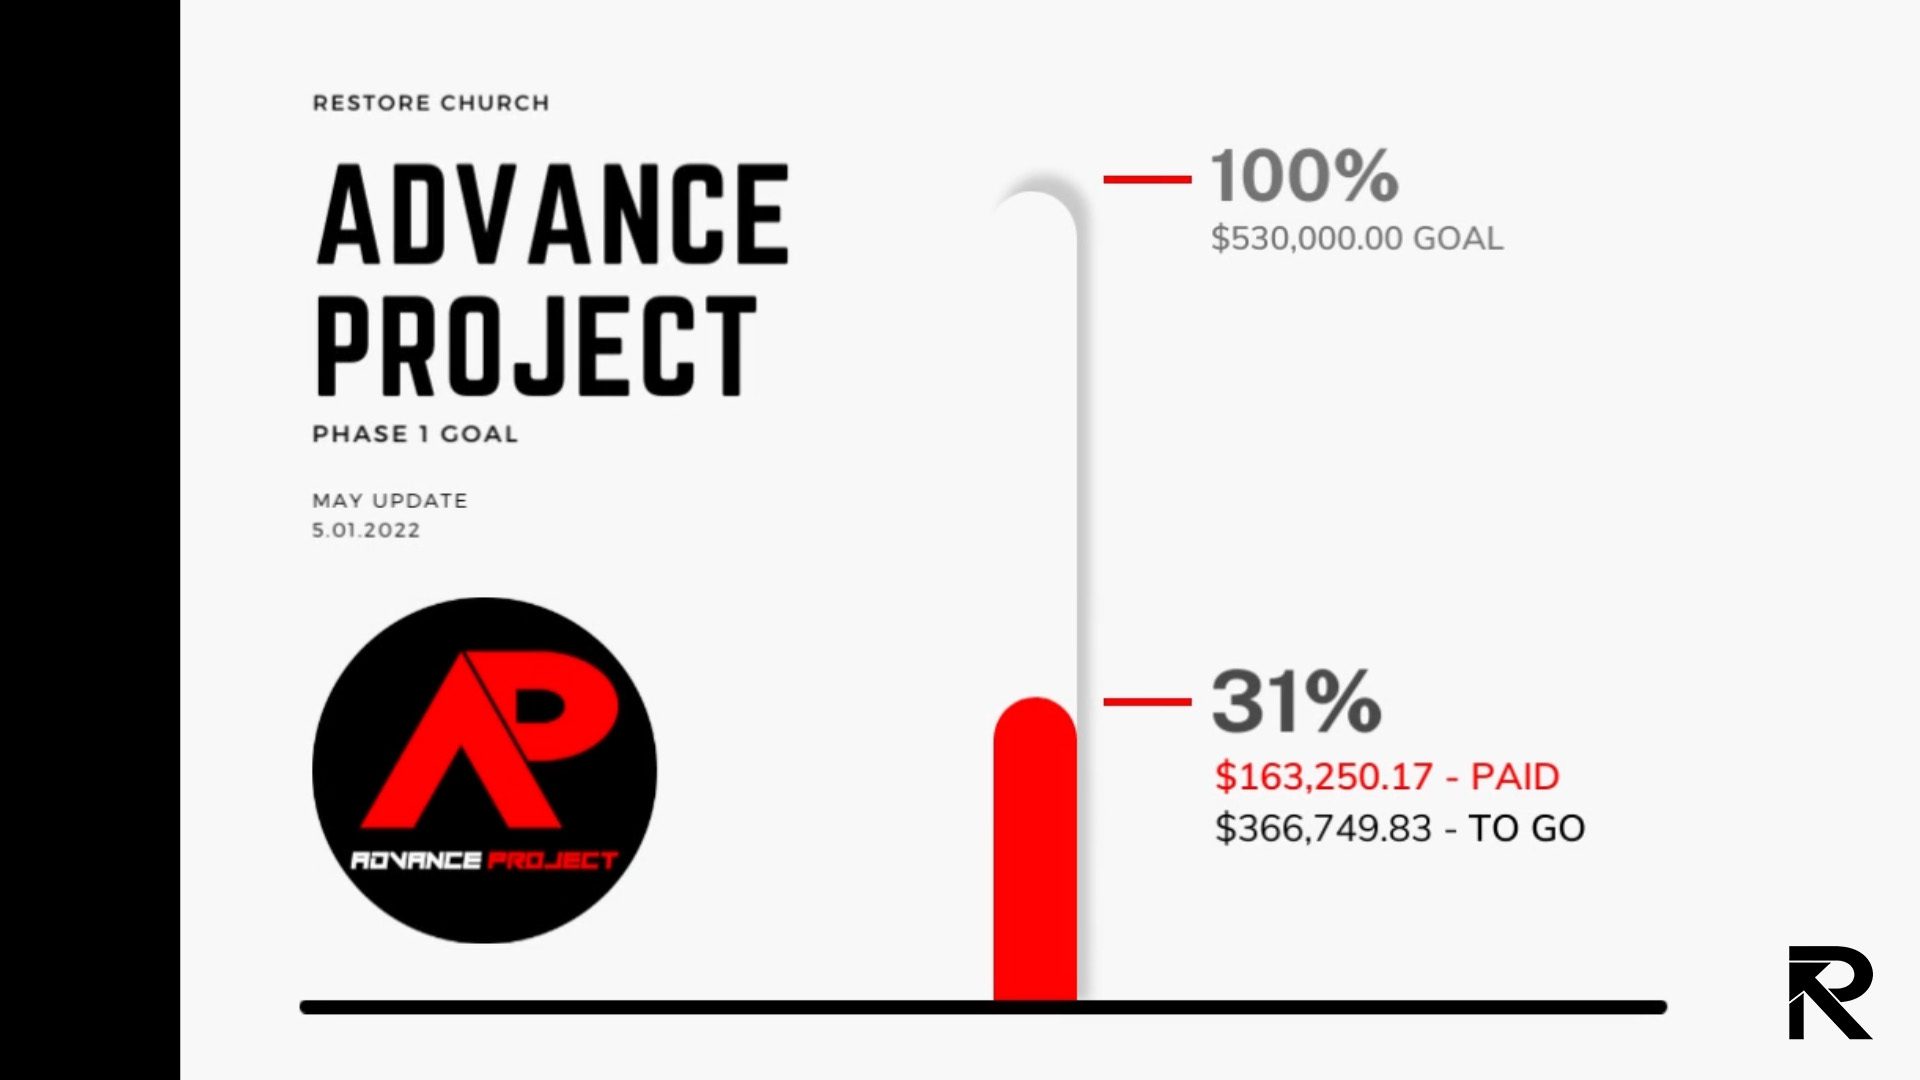 Advance Project Phase 1 Goal - 31% paid of $530k goal.